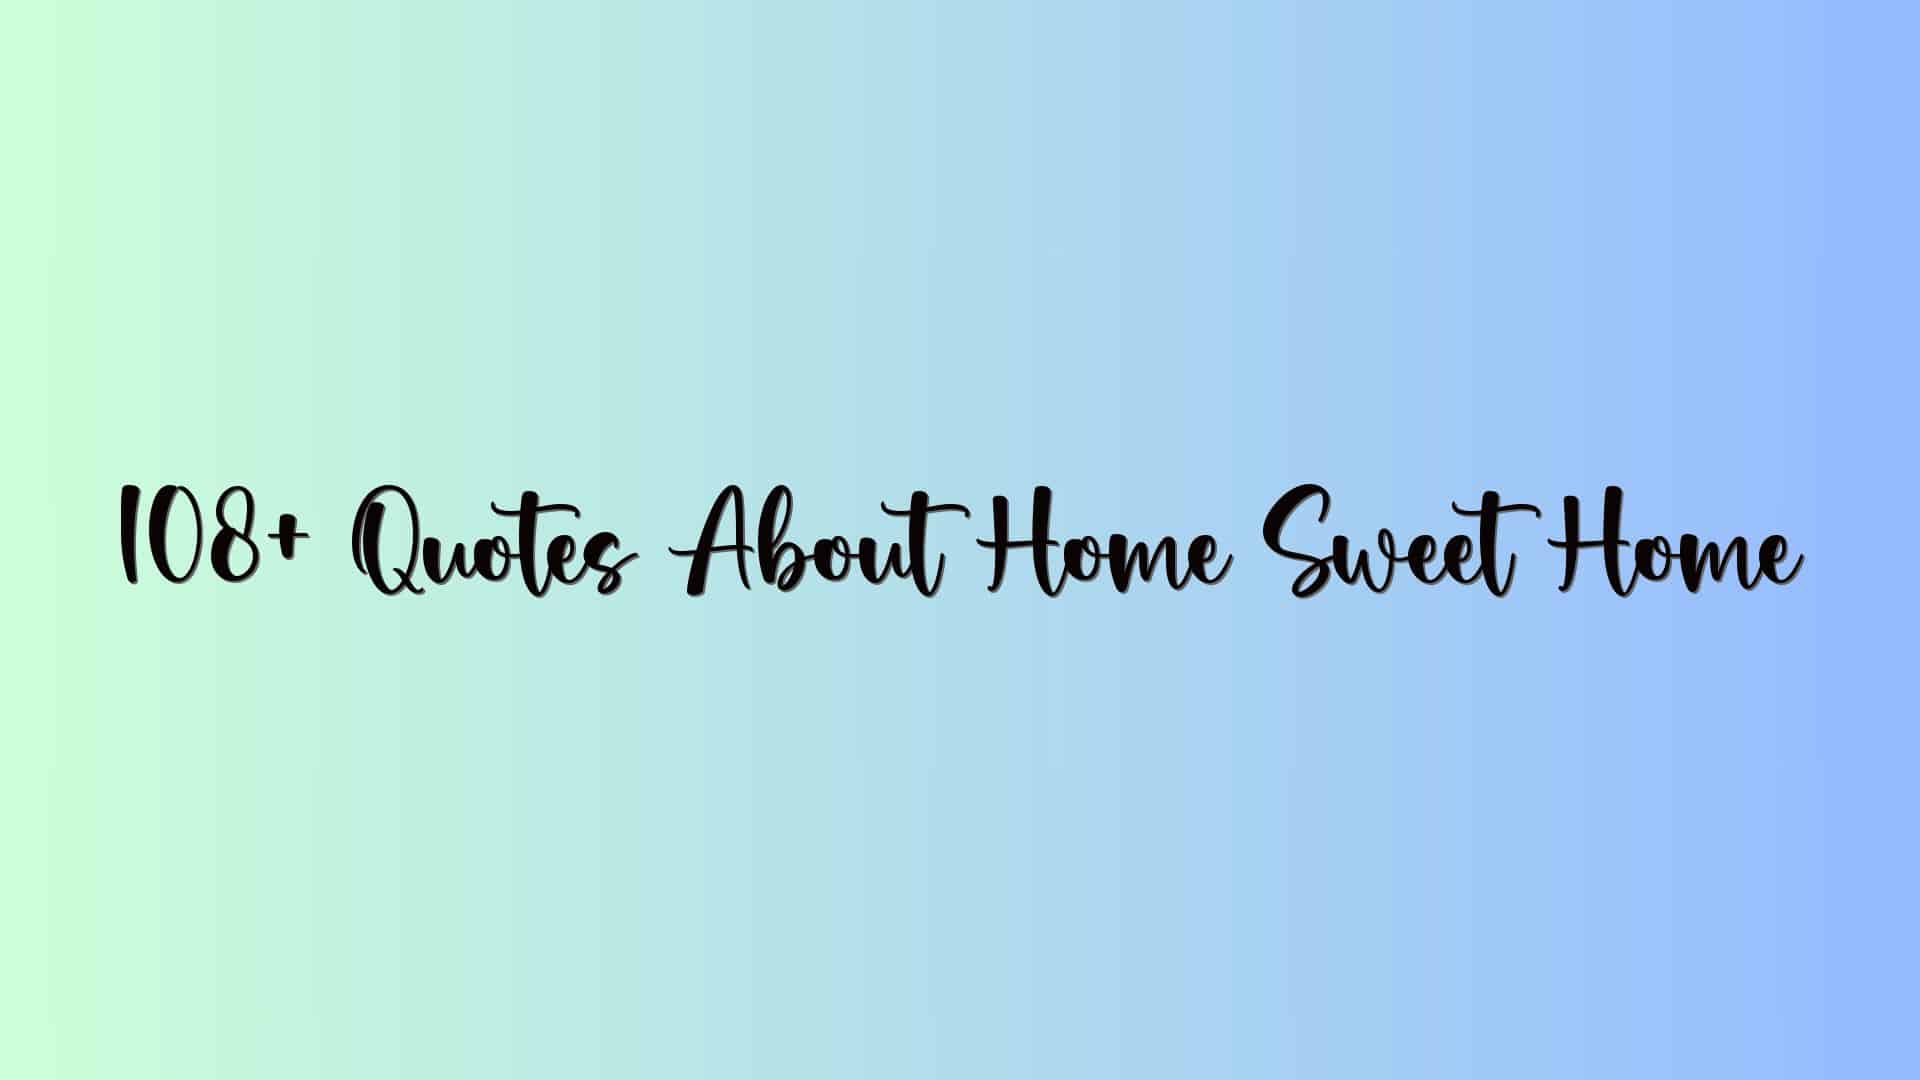 108+ Quotes About Home Sweet Home